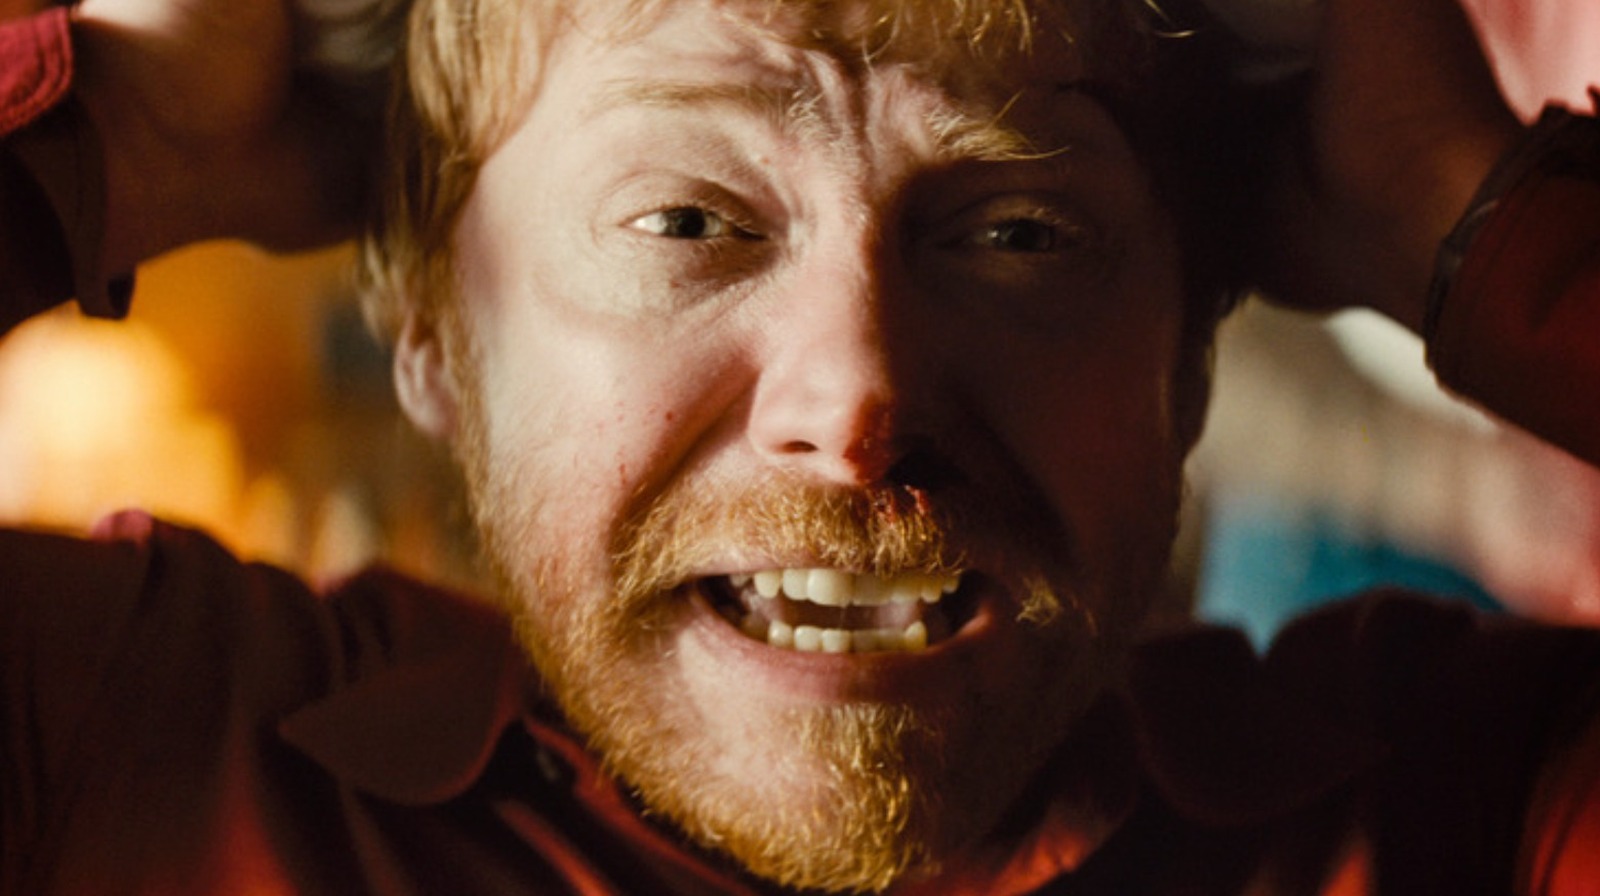 Hitting the cabin house invasion was a very real fear for Rupert Grint